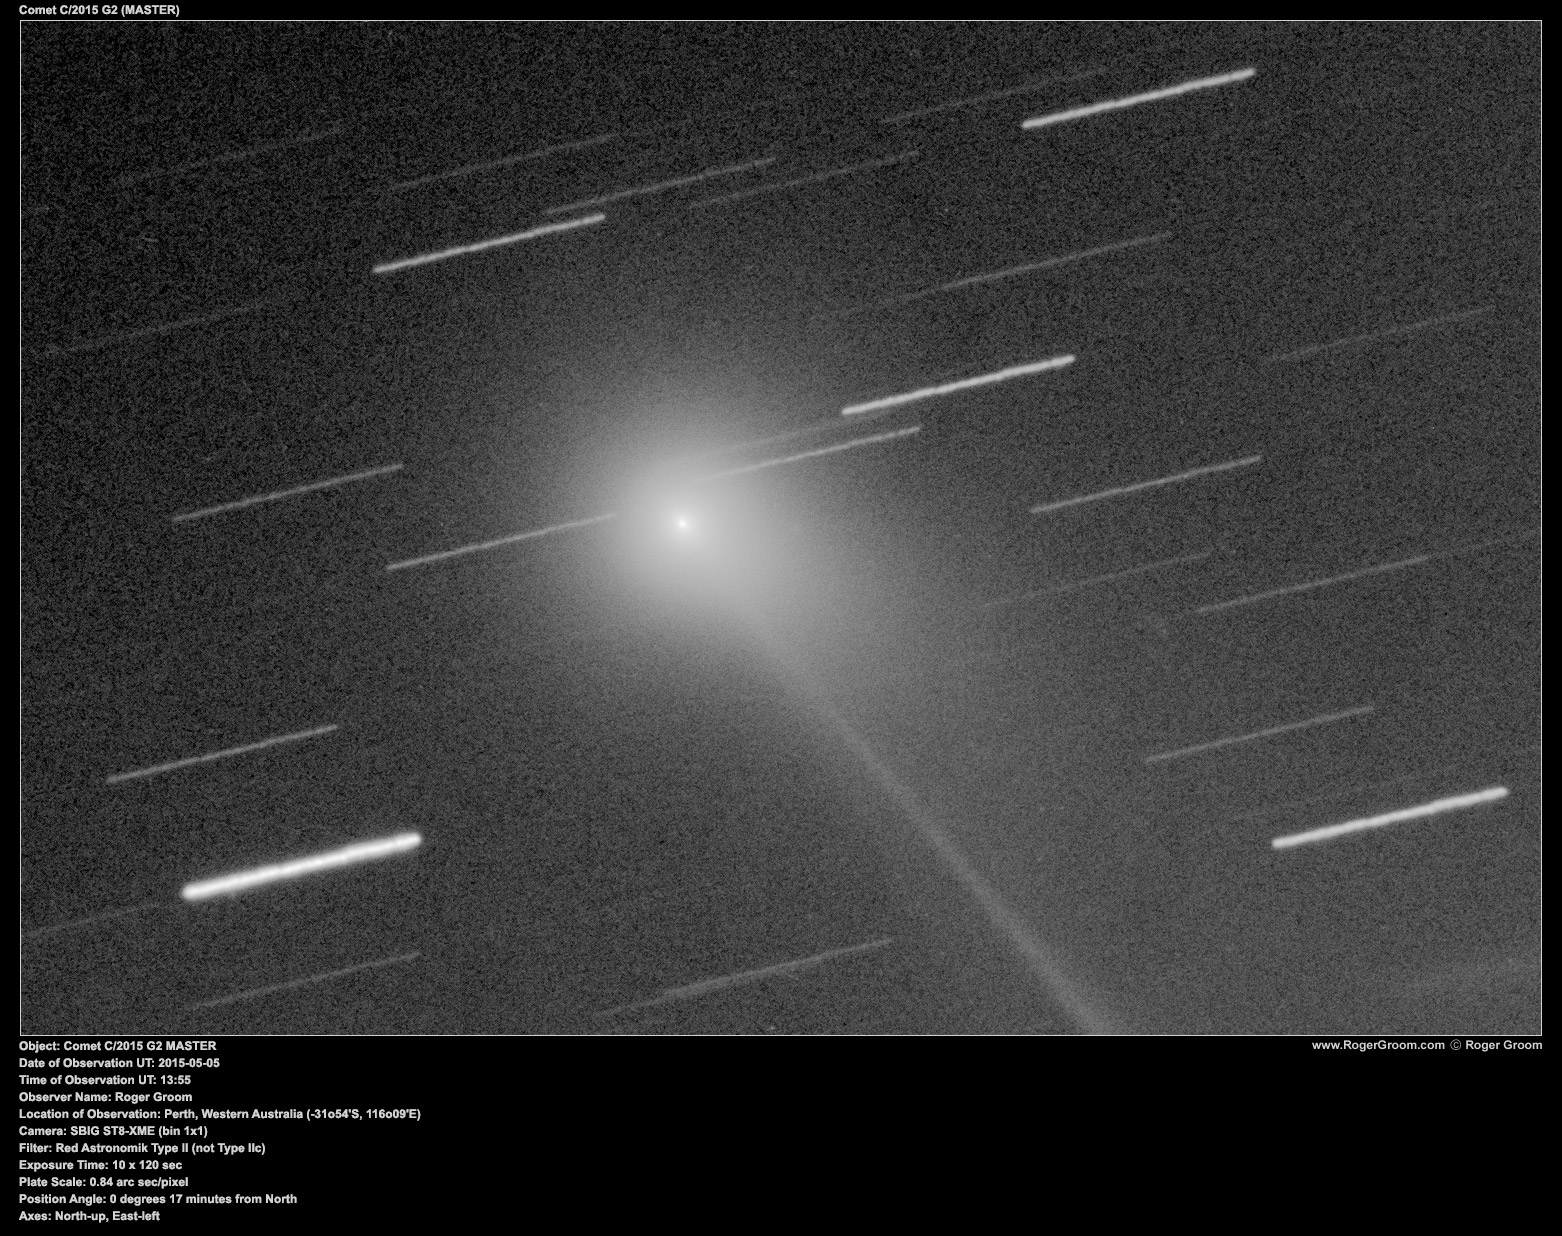 Object: Comet C/2015 G2 MASTER Date of Observation UT: 2015-05-05 Time of Observation UT: 13:55 Observer Name: Roger Groom Location of Observation: Perth, Western Australia (-31o54'S, 116o09'E) Camera: SBIG ST8-XME (bin 1x1) Filter: Red Astronomik Type II (not Type IIc) Exposure Time: 10 x 120 sec Plate Scale: 0.84 arc sec/pixel Position Angle: 0 degrees 17 minutes from North Axes: North-up, East-left